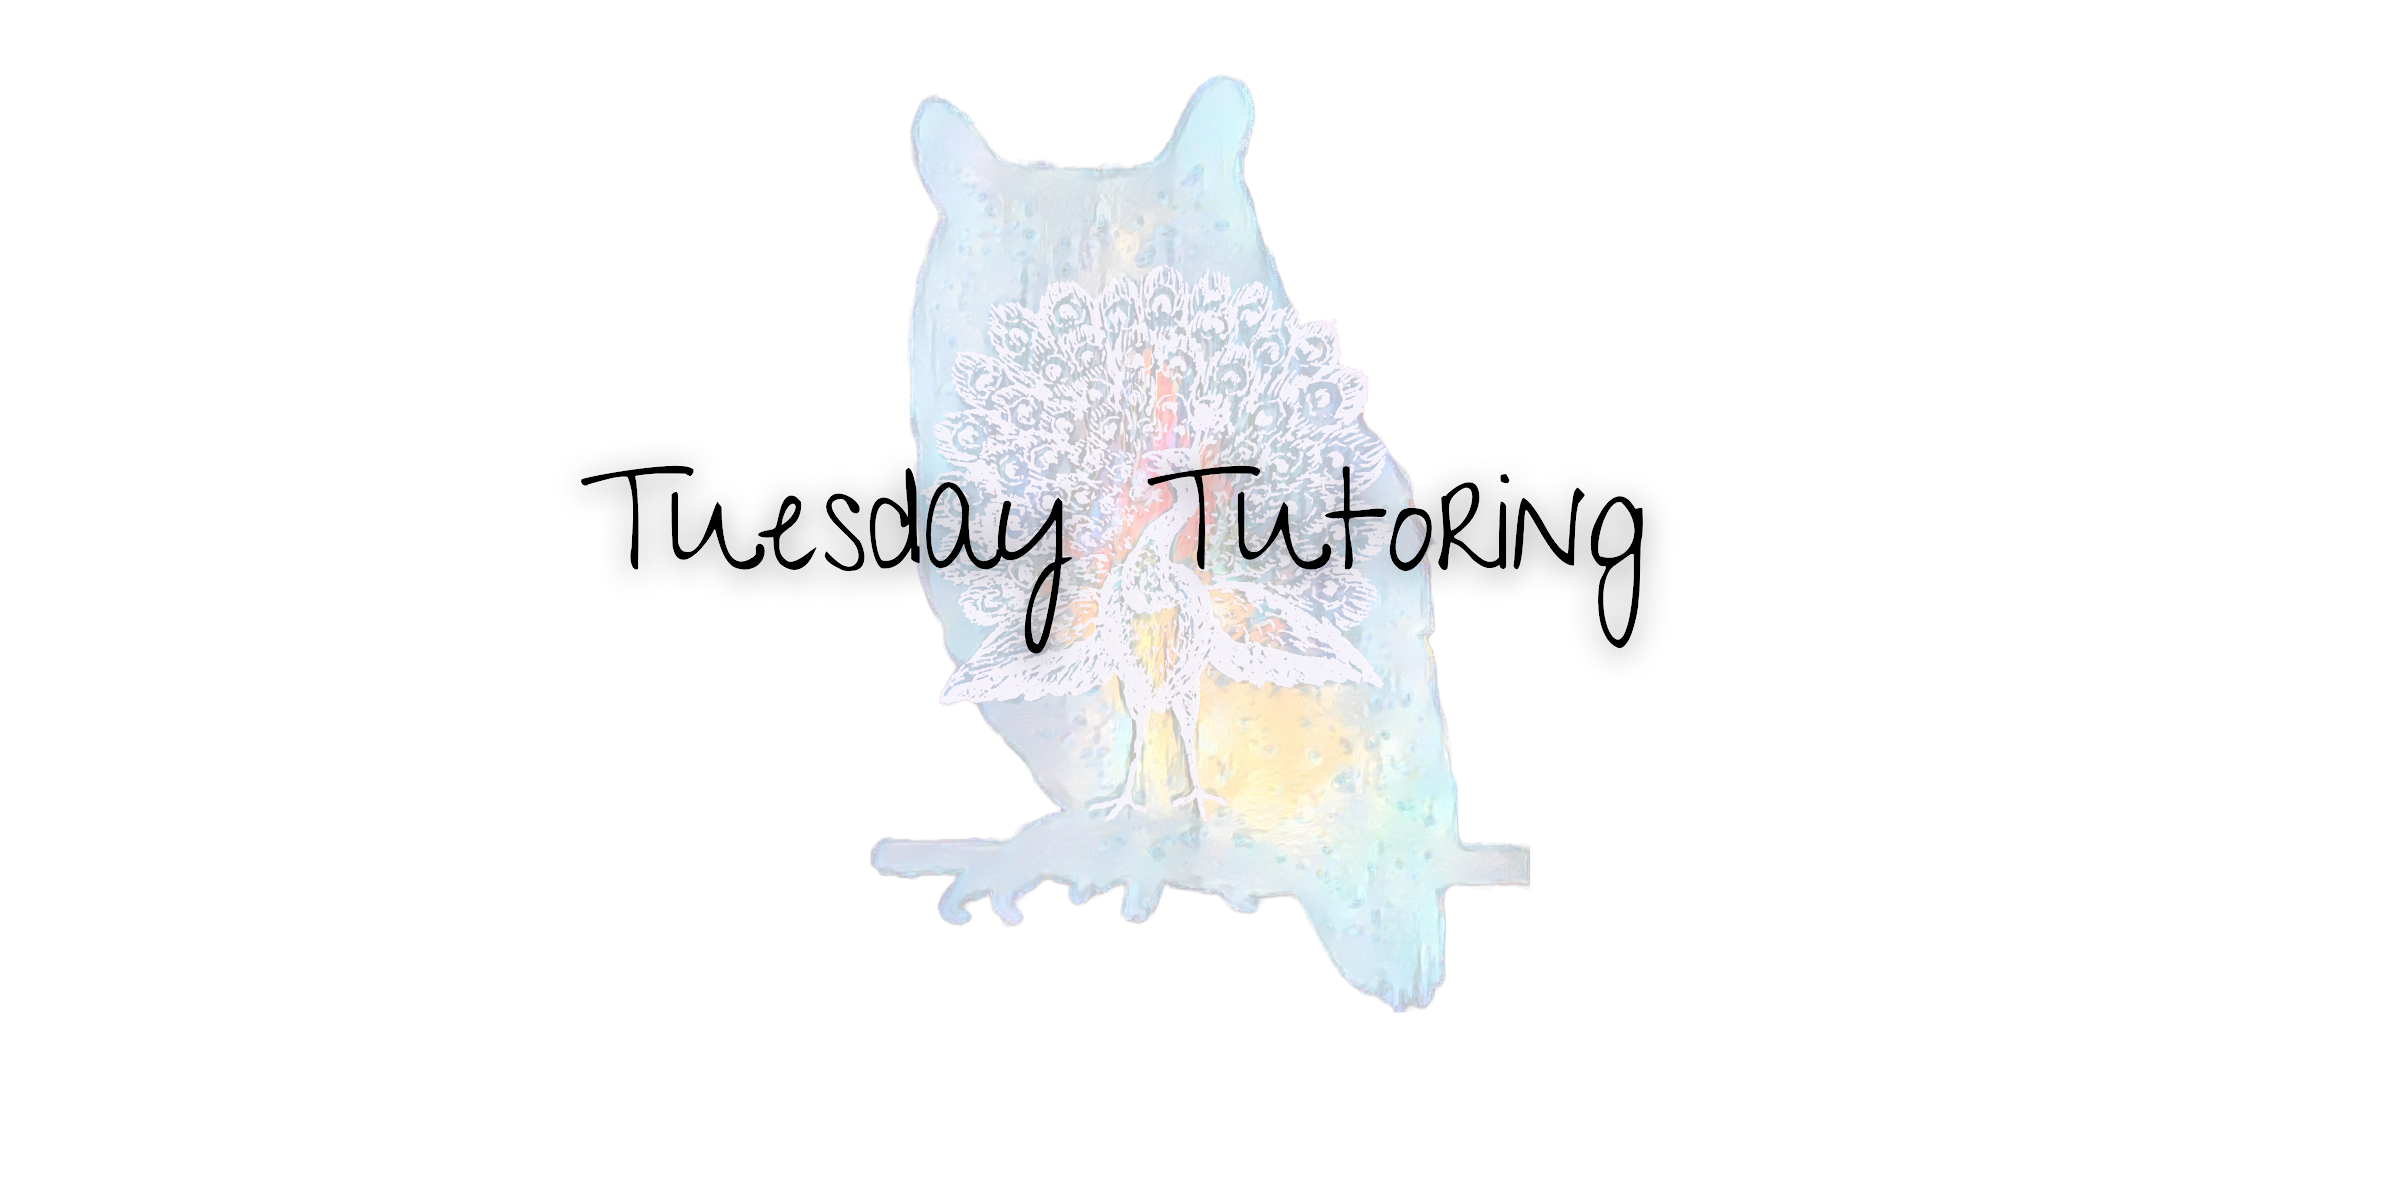 Tuesday Tutoring: The Power of Connection and Community in Spiritual Growth and Tutoring